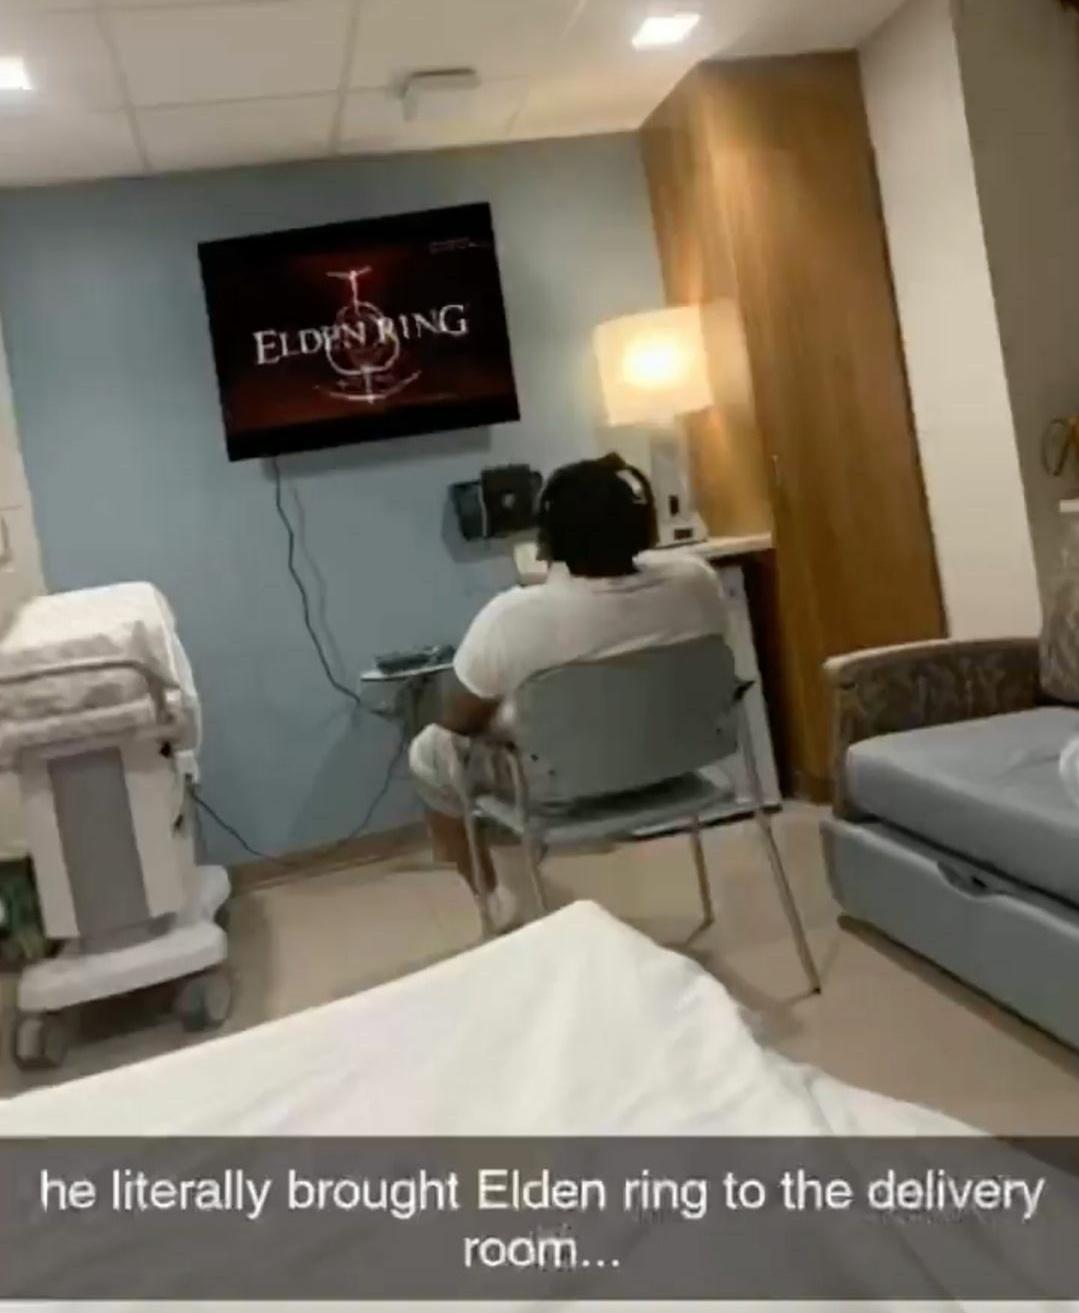 monday morning randomness - he literally brought elden ring to the delivery room - Elden Ring he literally brought Elden ring to the delivery room...